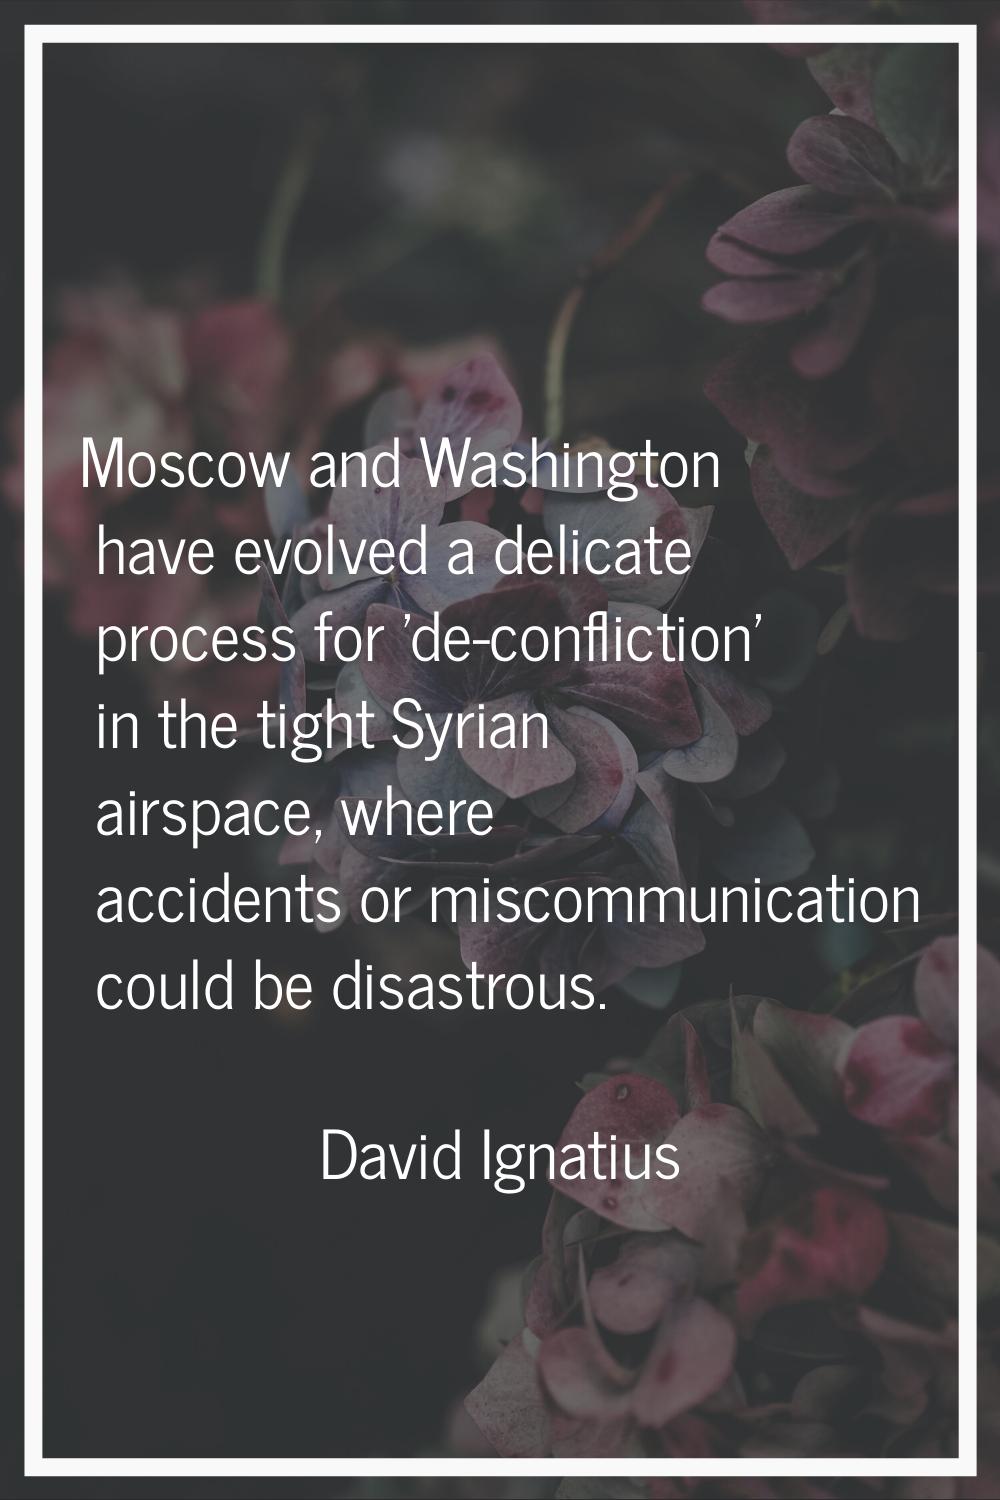 Moscow and Washington have evolved a delicate process for 'de-confliction' in the tight Syrian airs